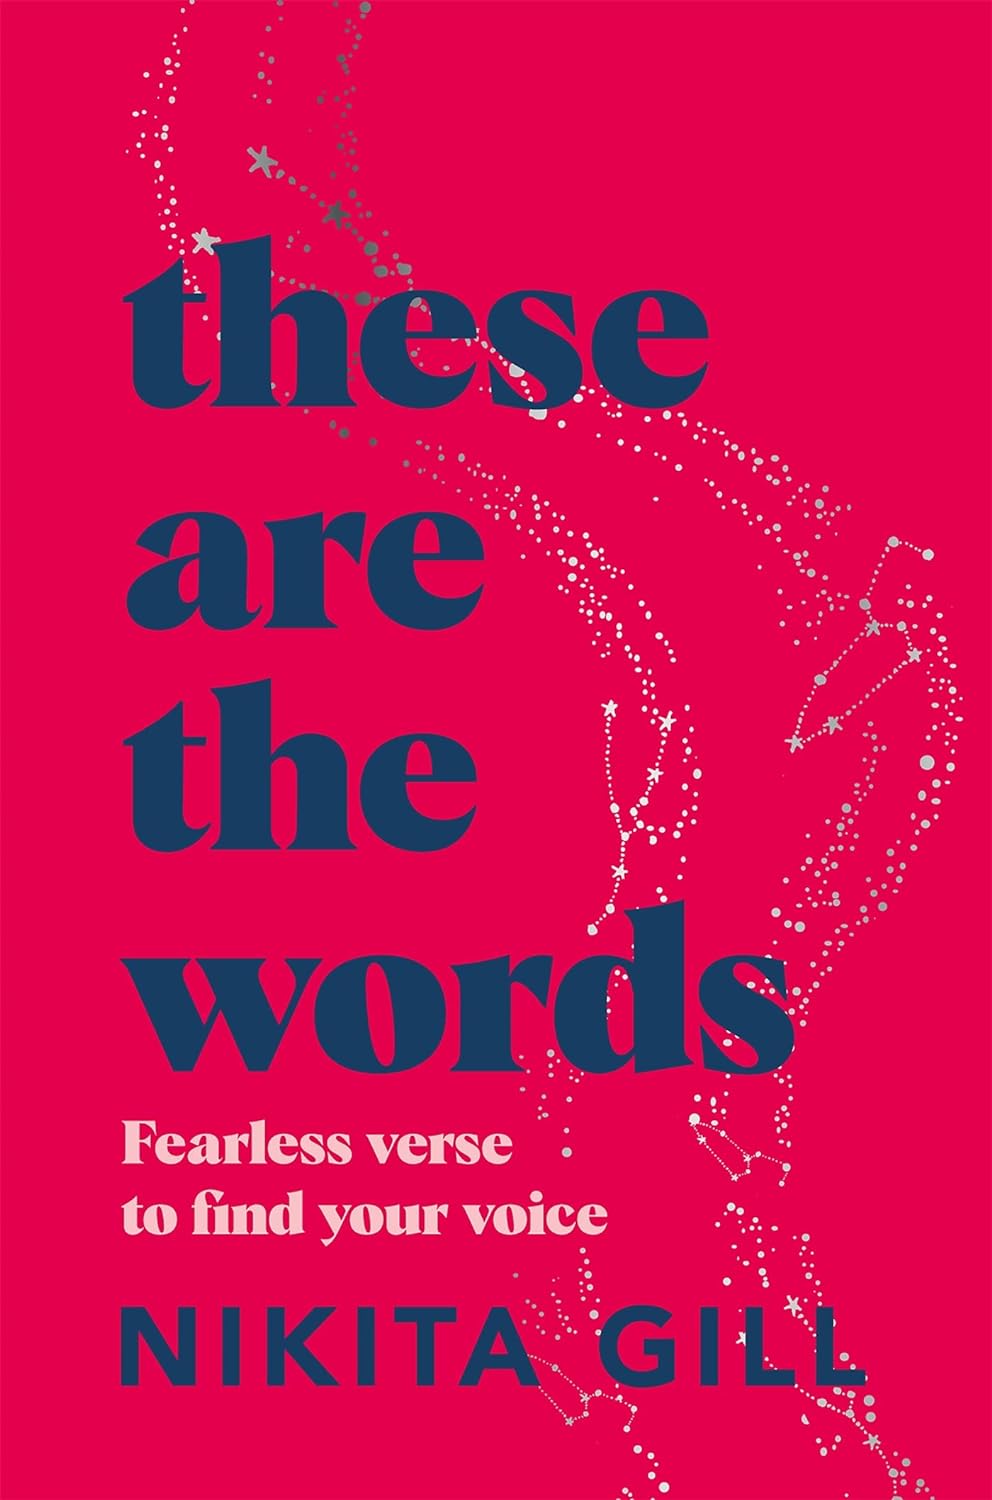 One of our recommended books is These Are the Words by Nikita Gill